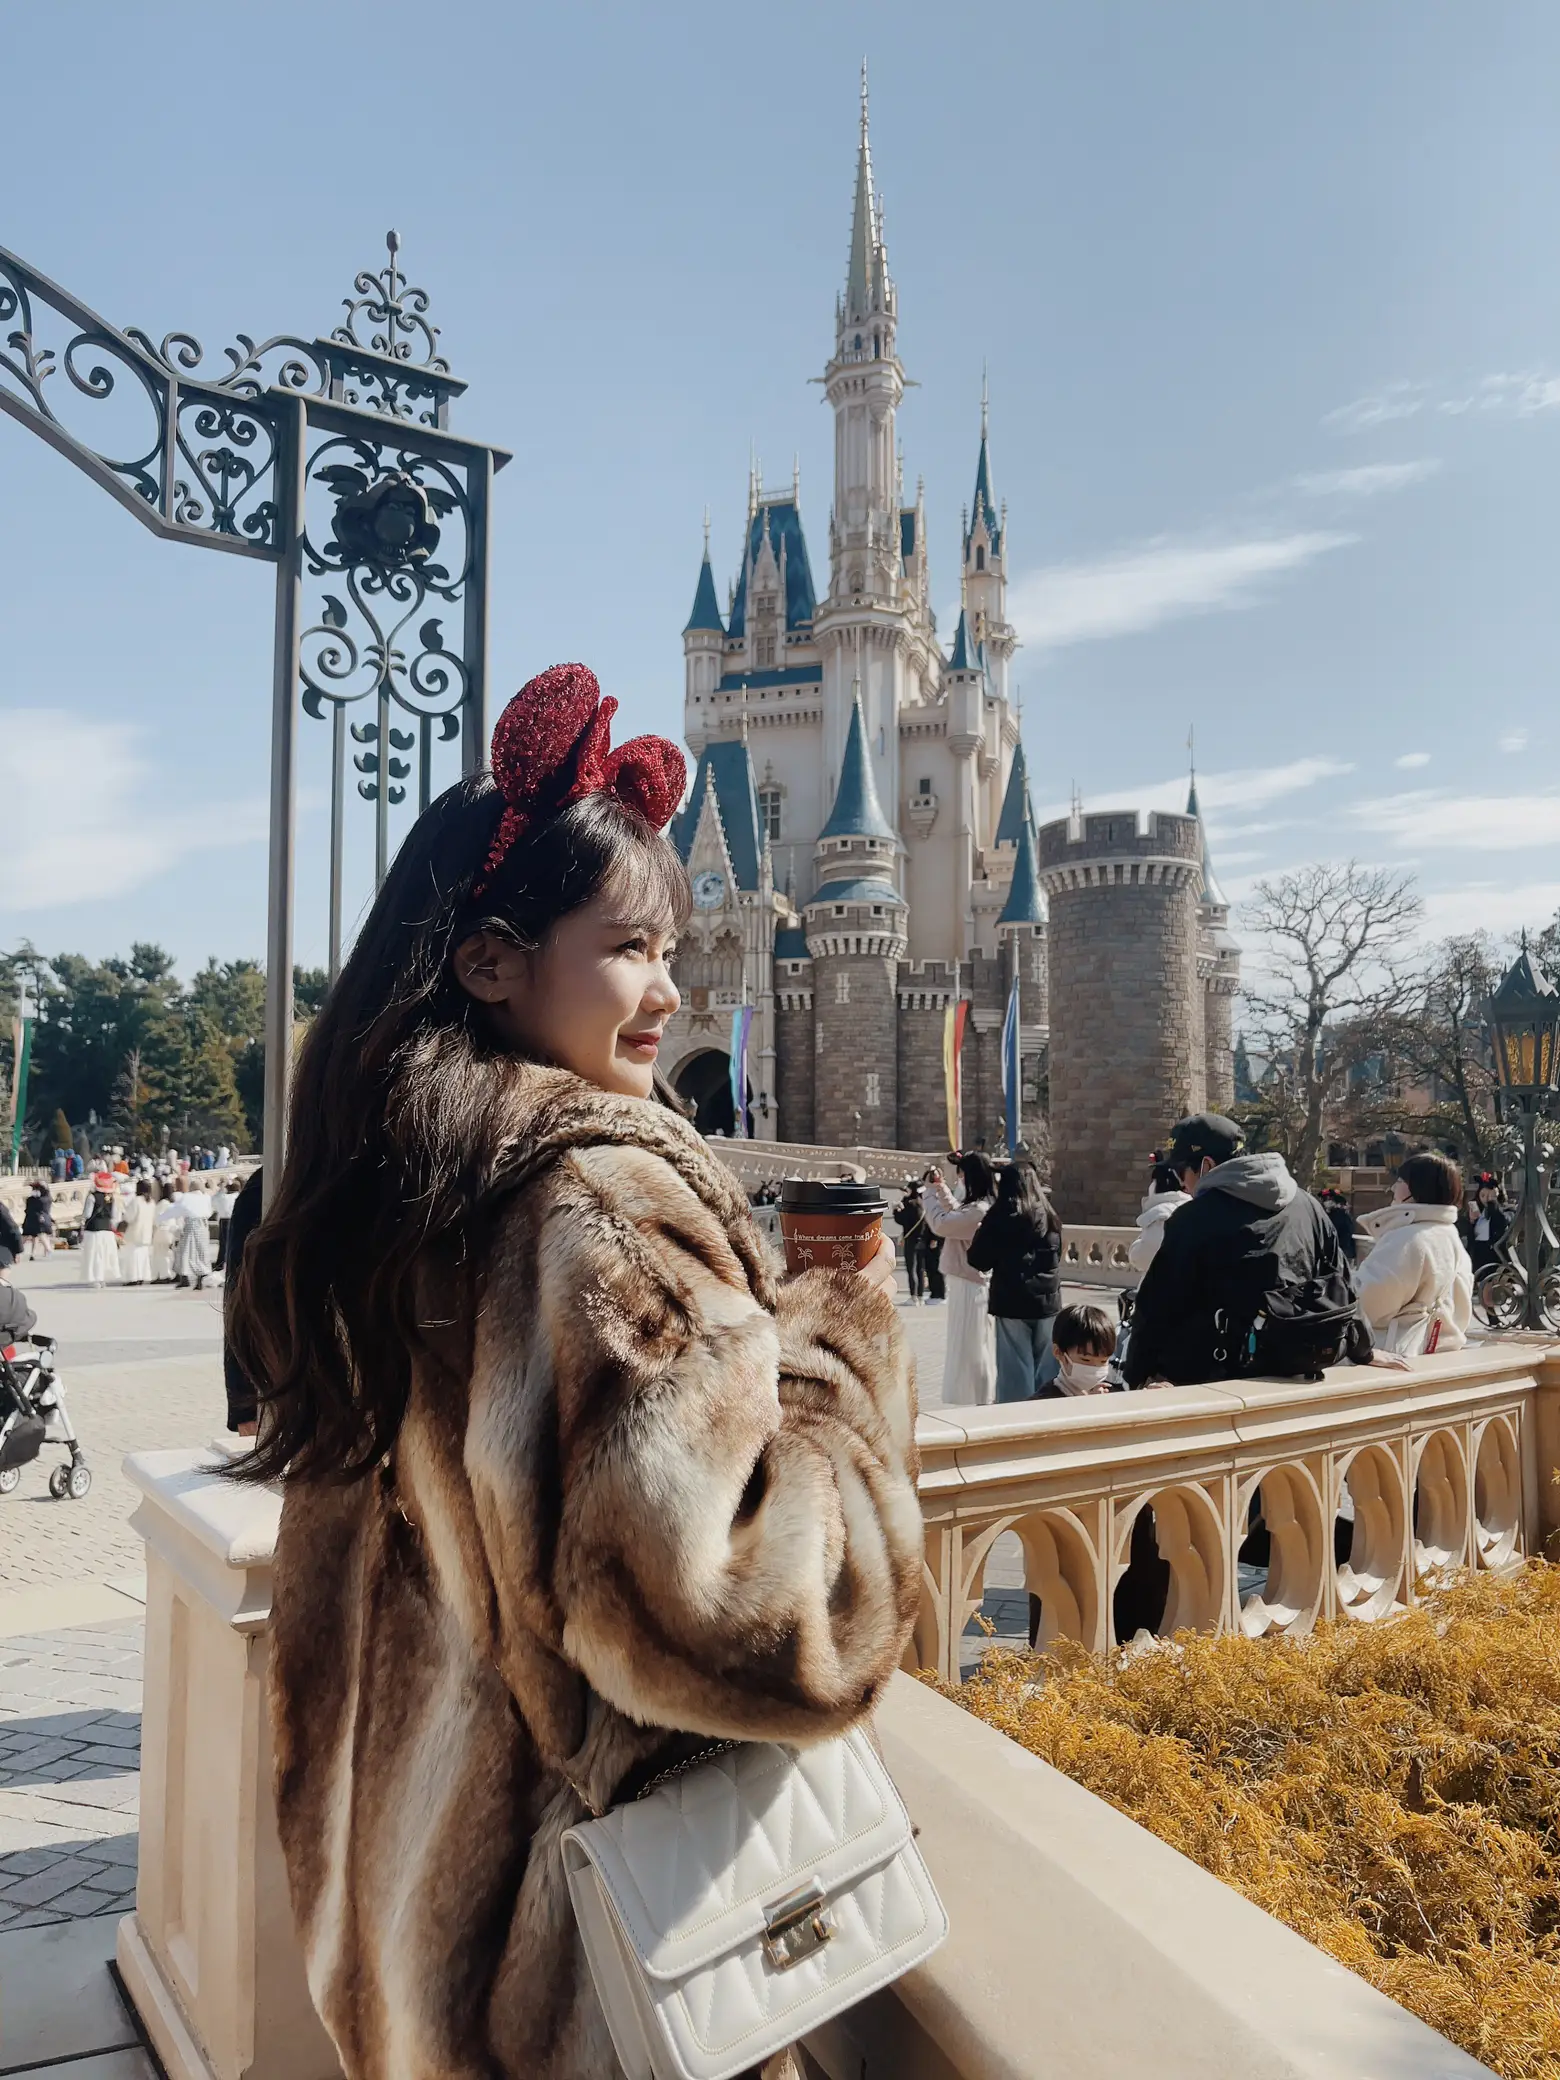 Disney outfit😛💯 | Gallery posted by momoko | Lemon8